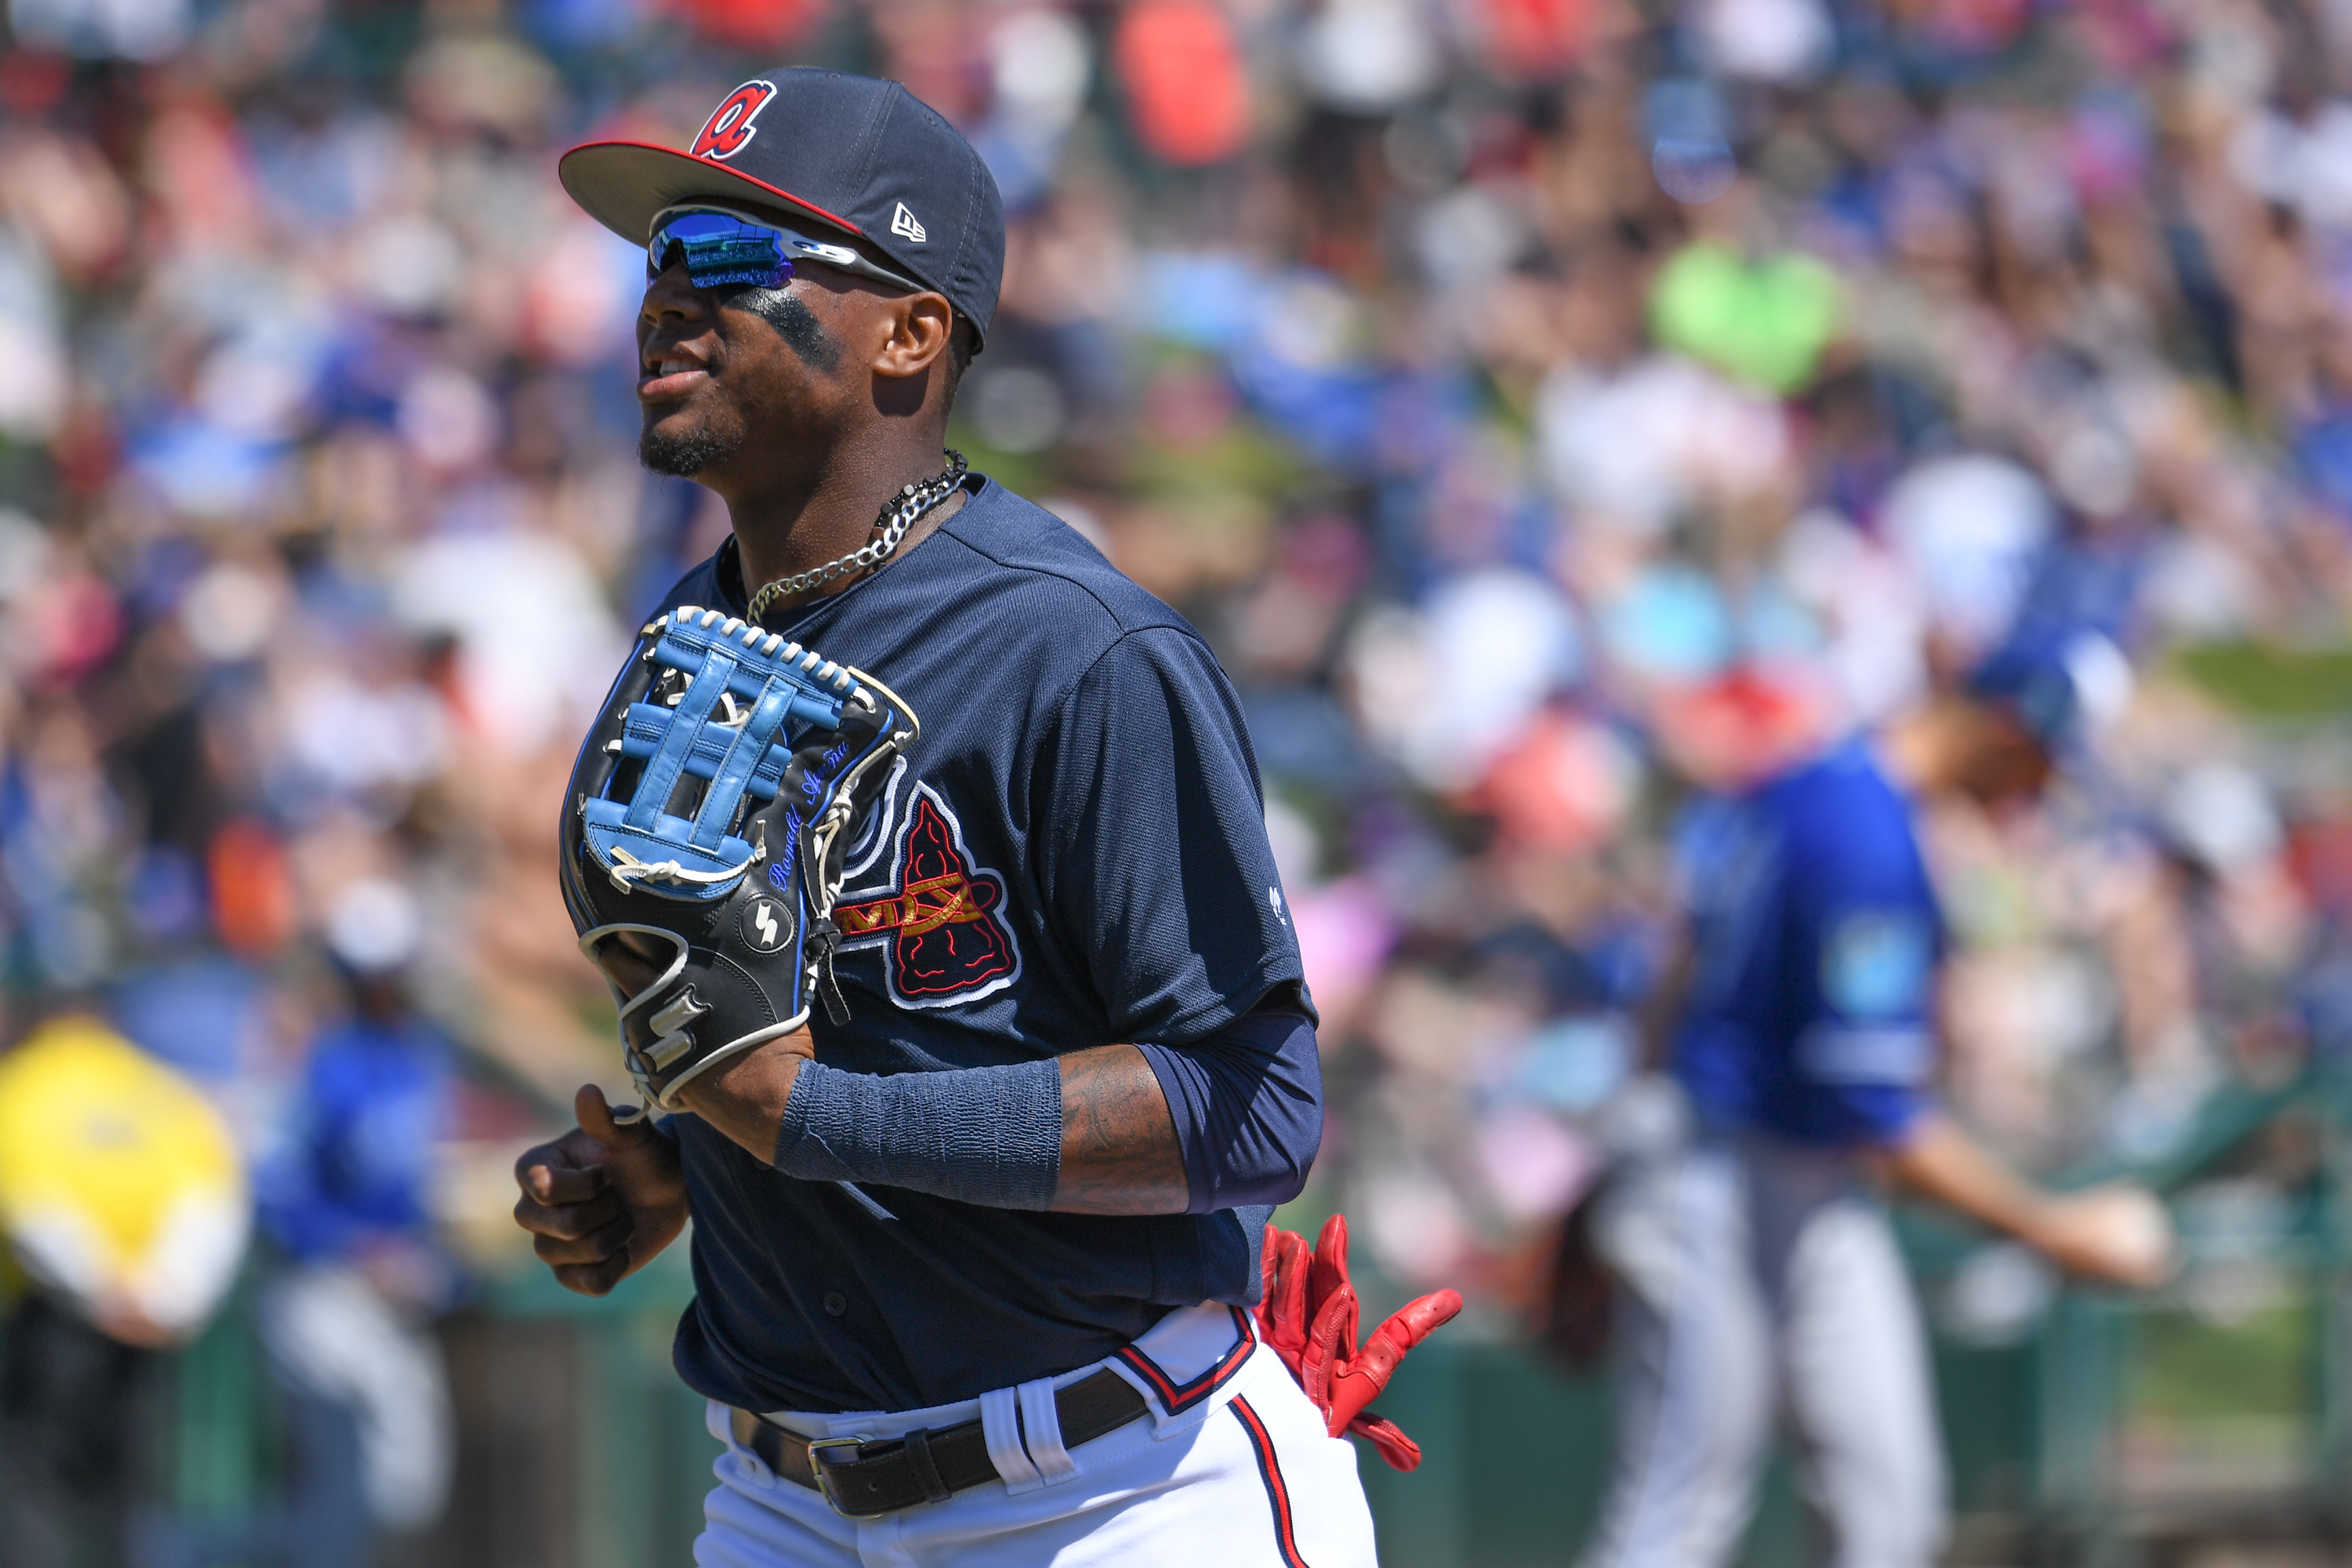 Report: Top Prospect Ronald Acuna Jr. Recalled from Triple-A by